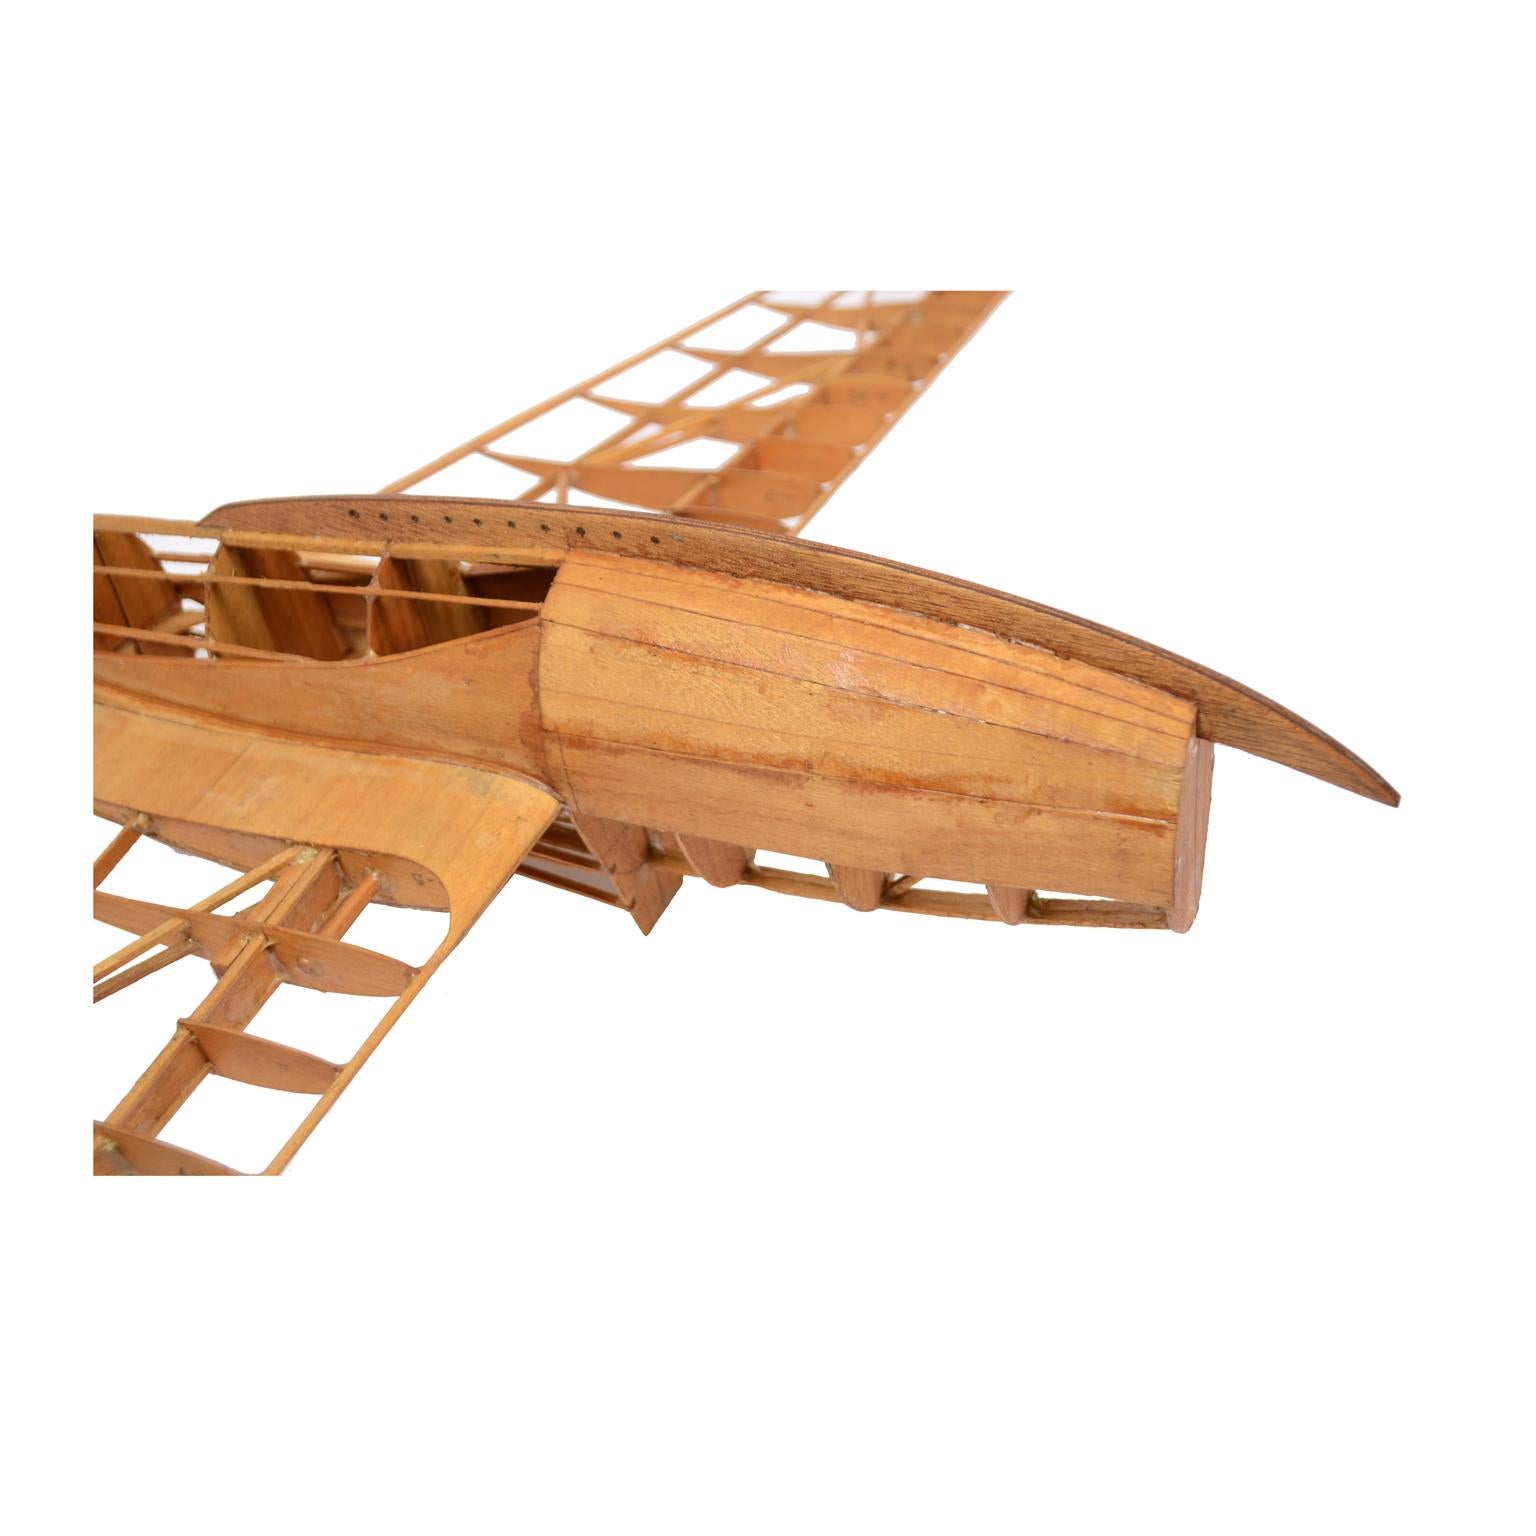 Scale Model of the Structure of a Passenger Airplane 8